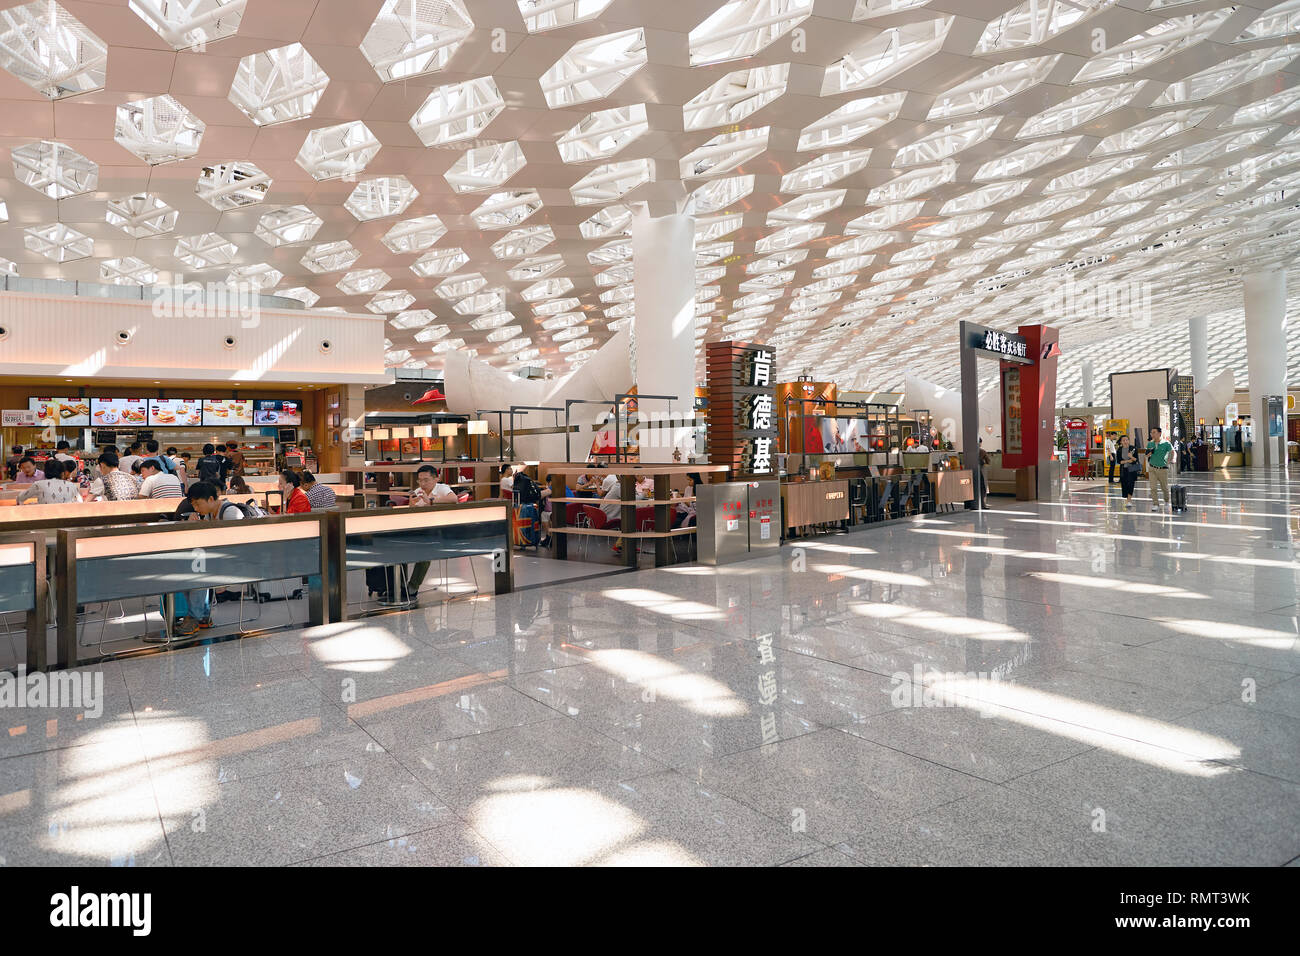 SHENZHEN, CHINA - CIRCA MAY, 2016: inside of Shenzhen Bao'an International Airport. It is located near Huangtian and Fuyong villages in Bao'an Distric Stock Photo